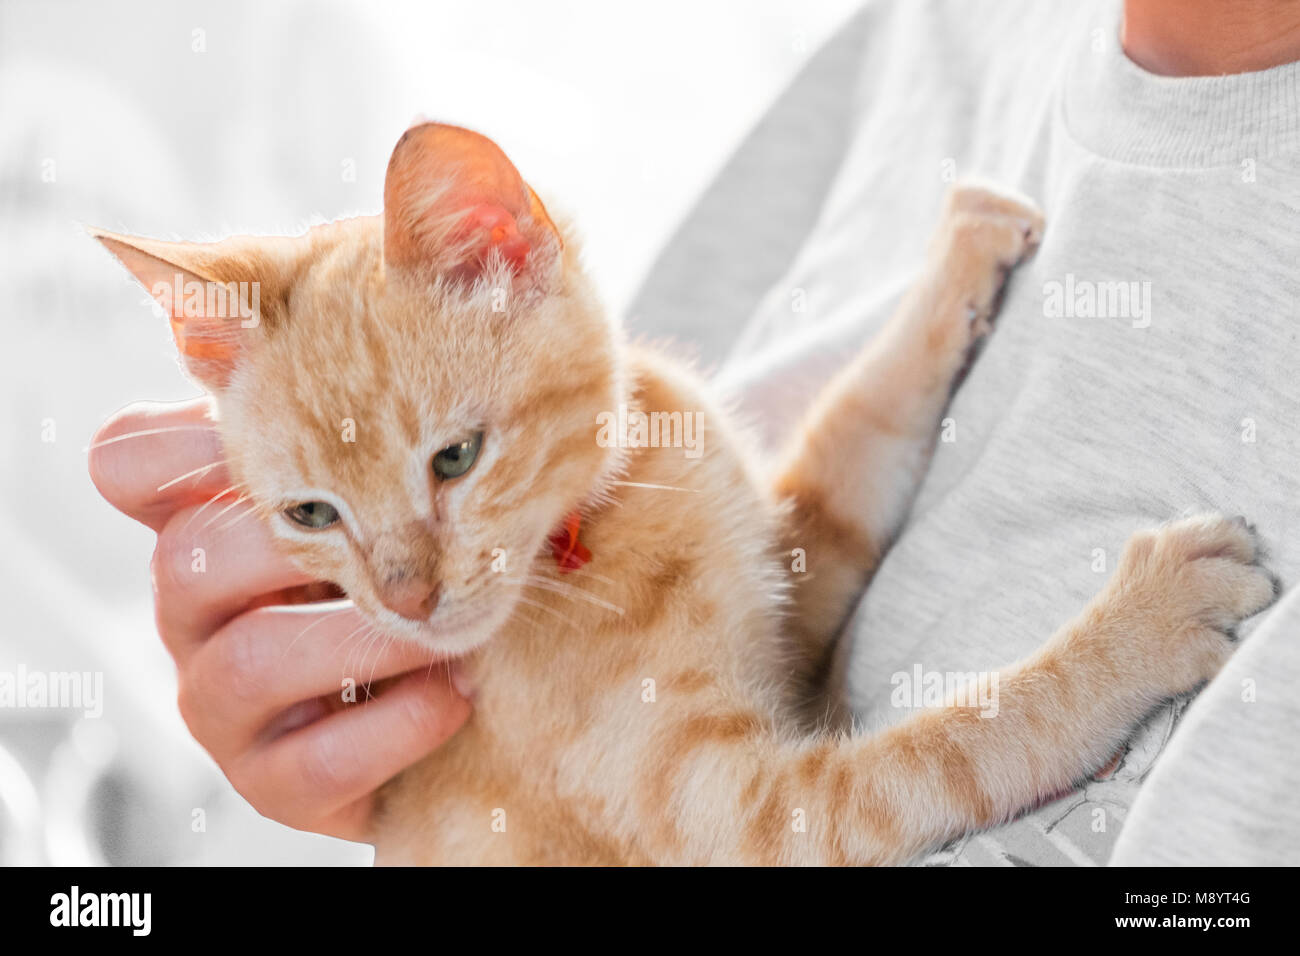 Holding Cute cat rouge d'armes - caresser kitty - Banque D'Images